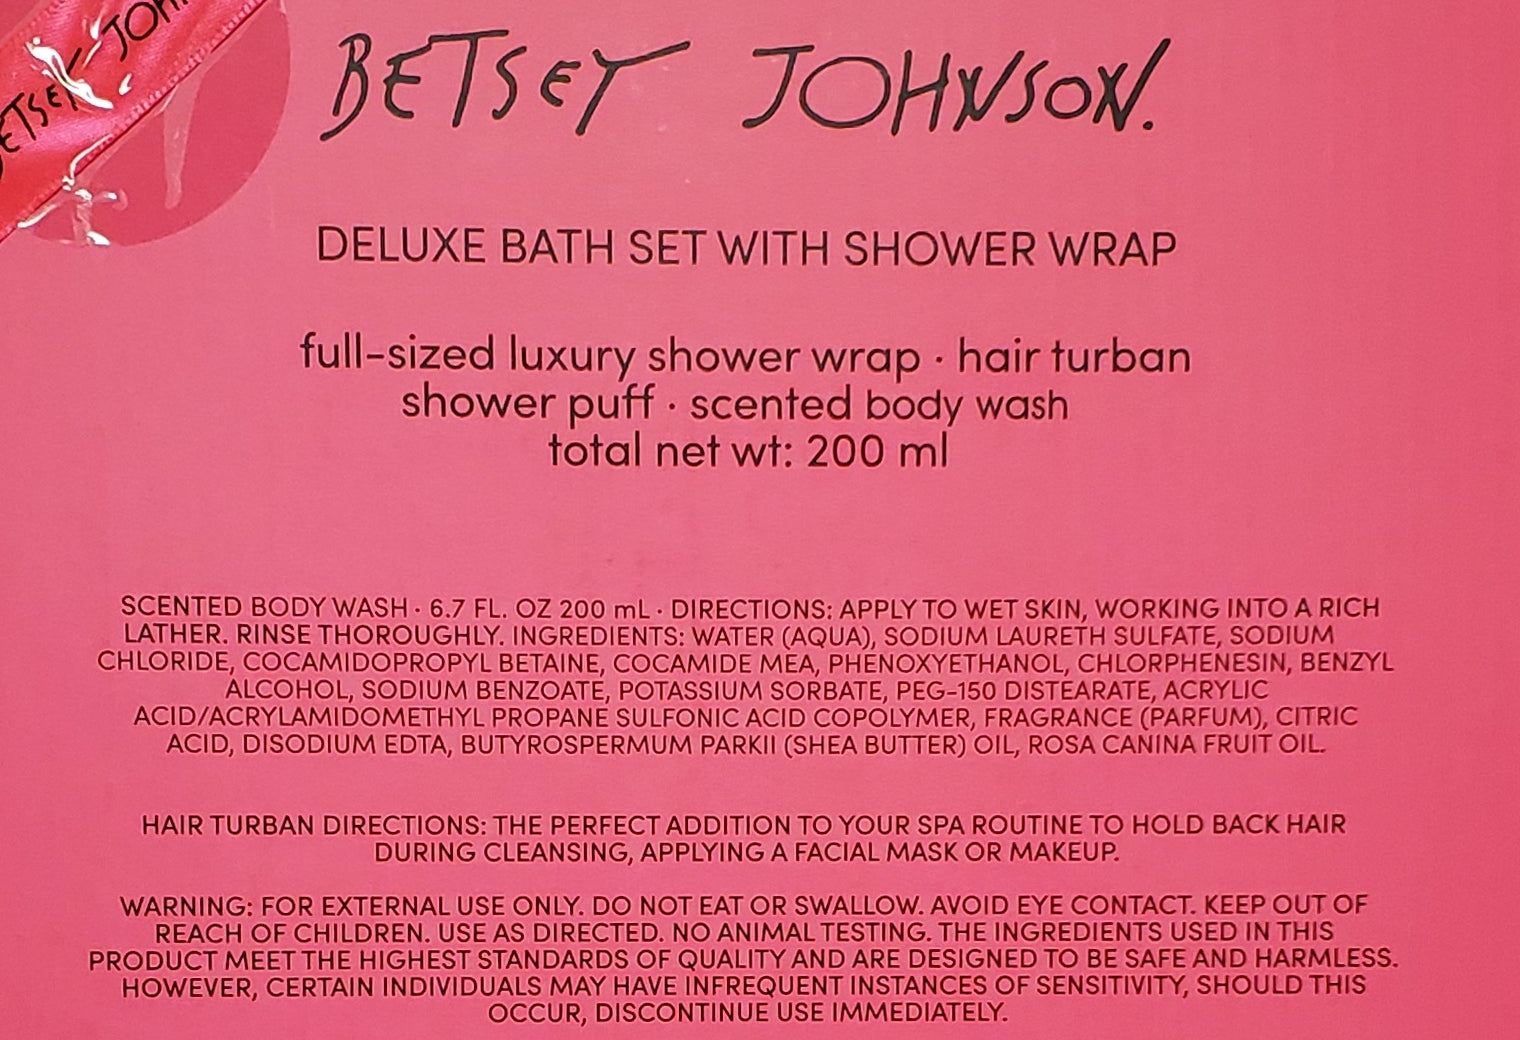 Betsey Johnson Deluxe Bath Set with Shower Wrap